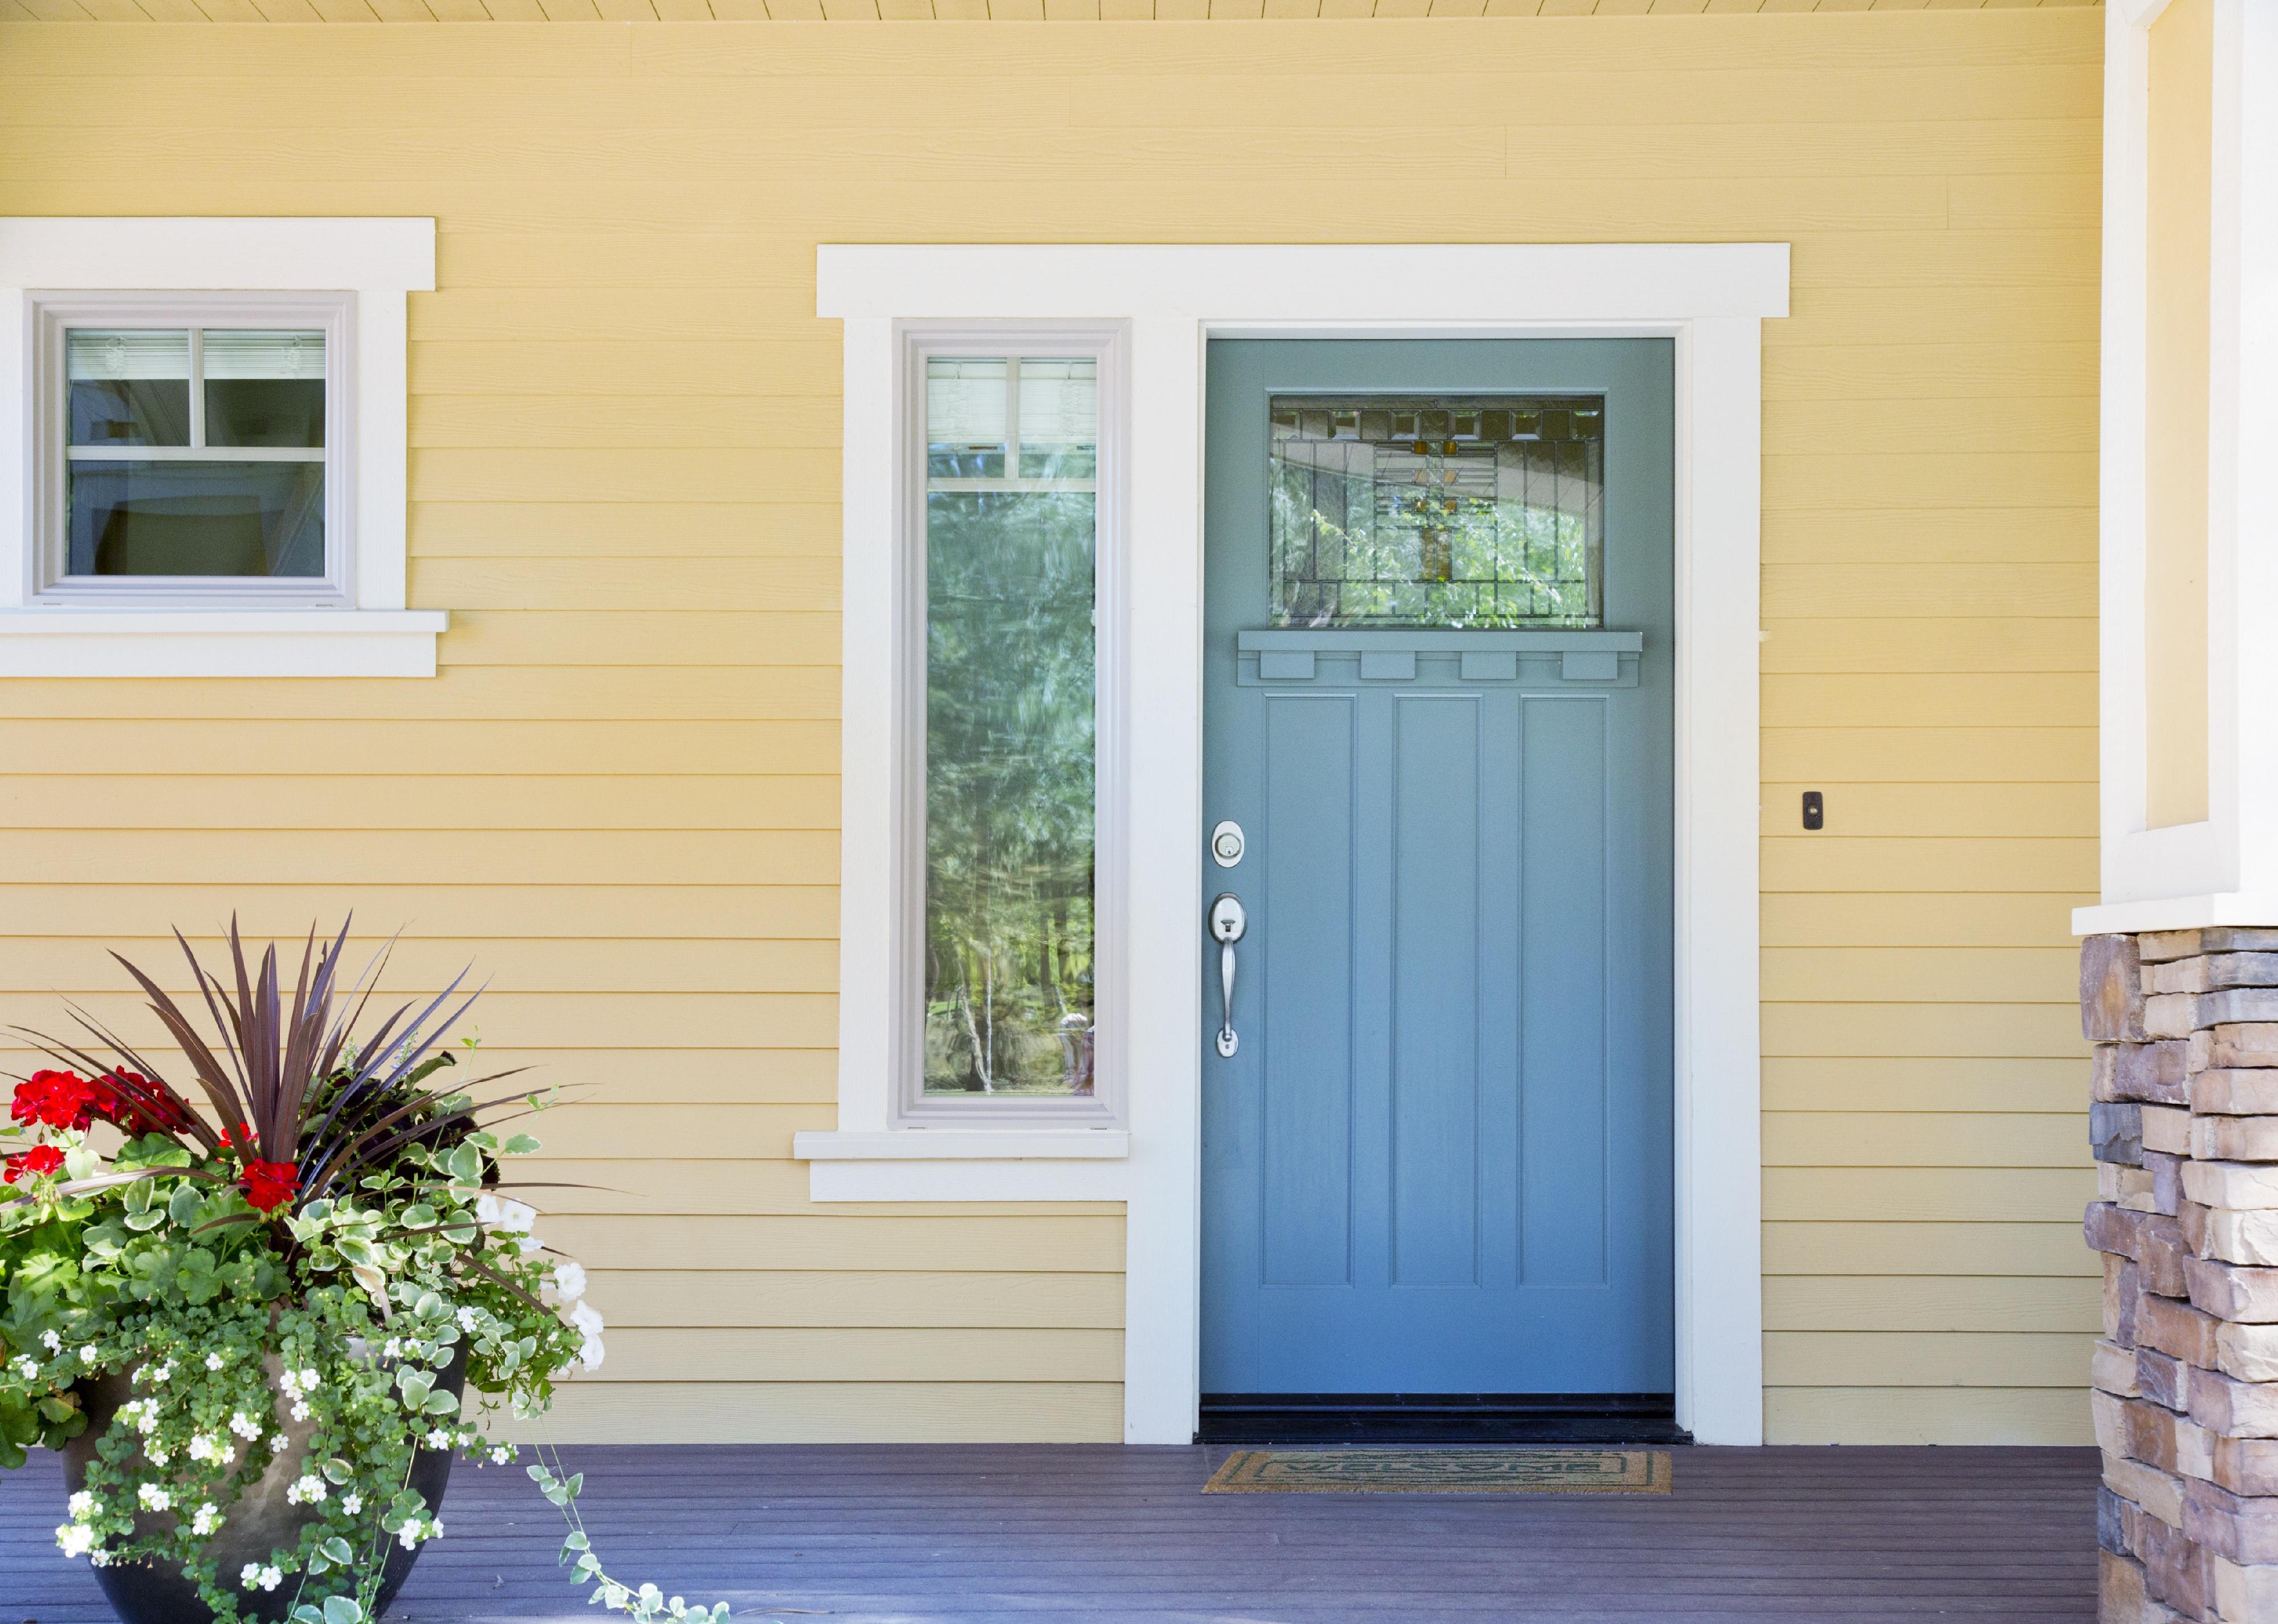 A front entrance of a home with a blue door, yellow siding, and a flowerpot.